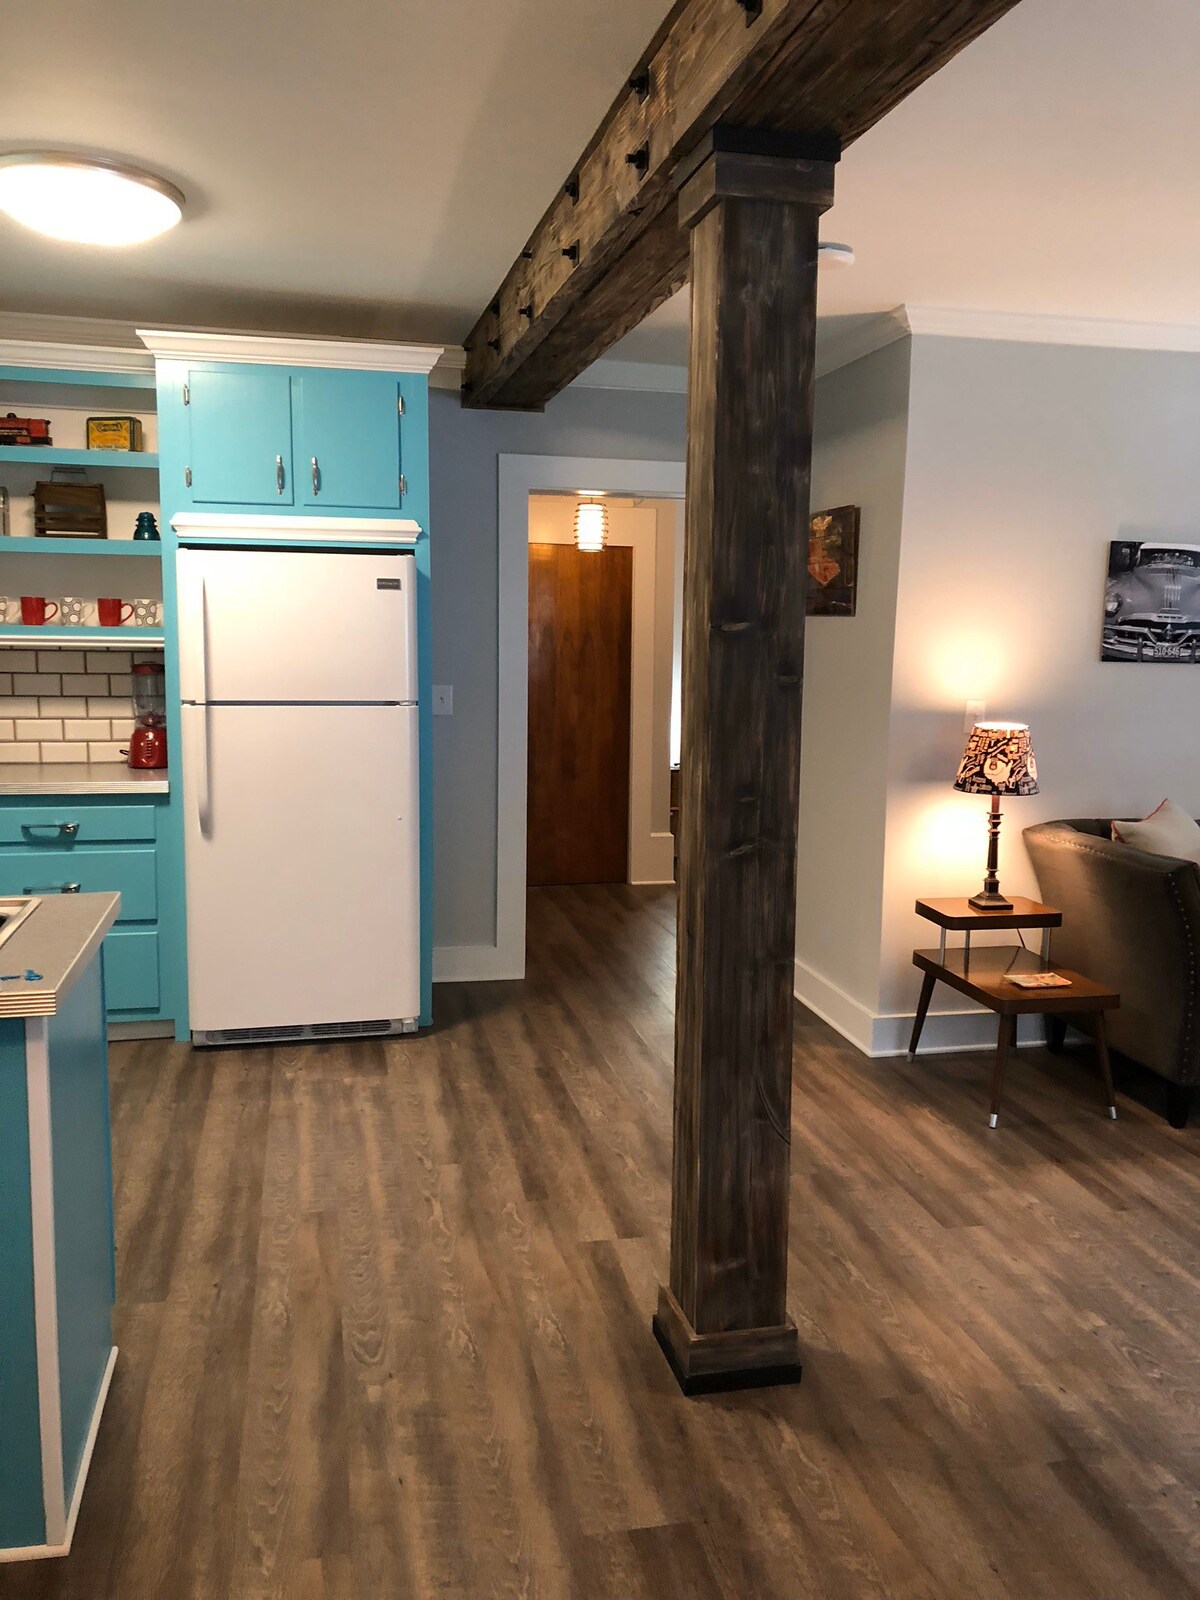 The Hot Rod Suite at Snooze and Cruise Apartments